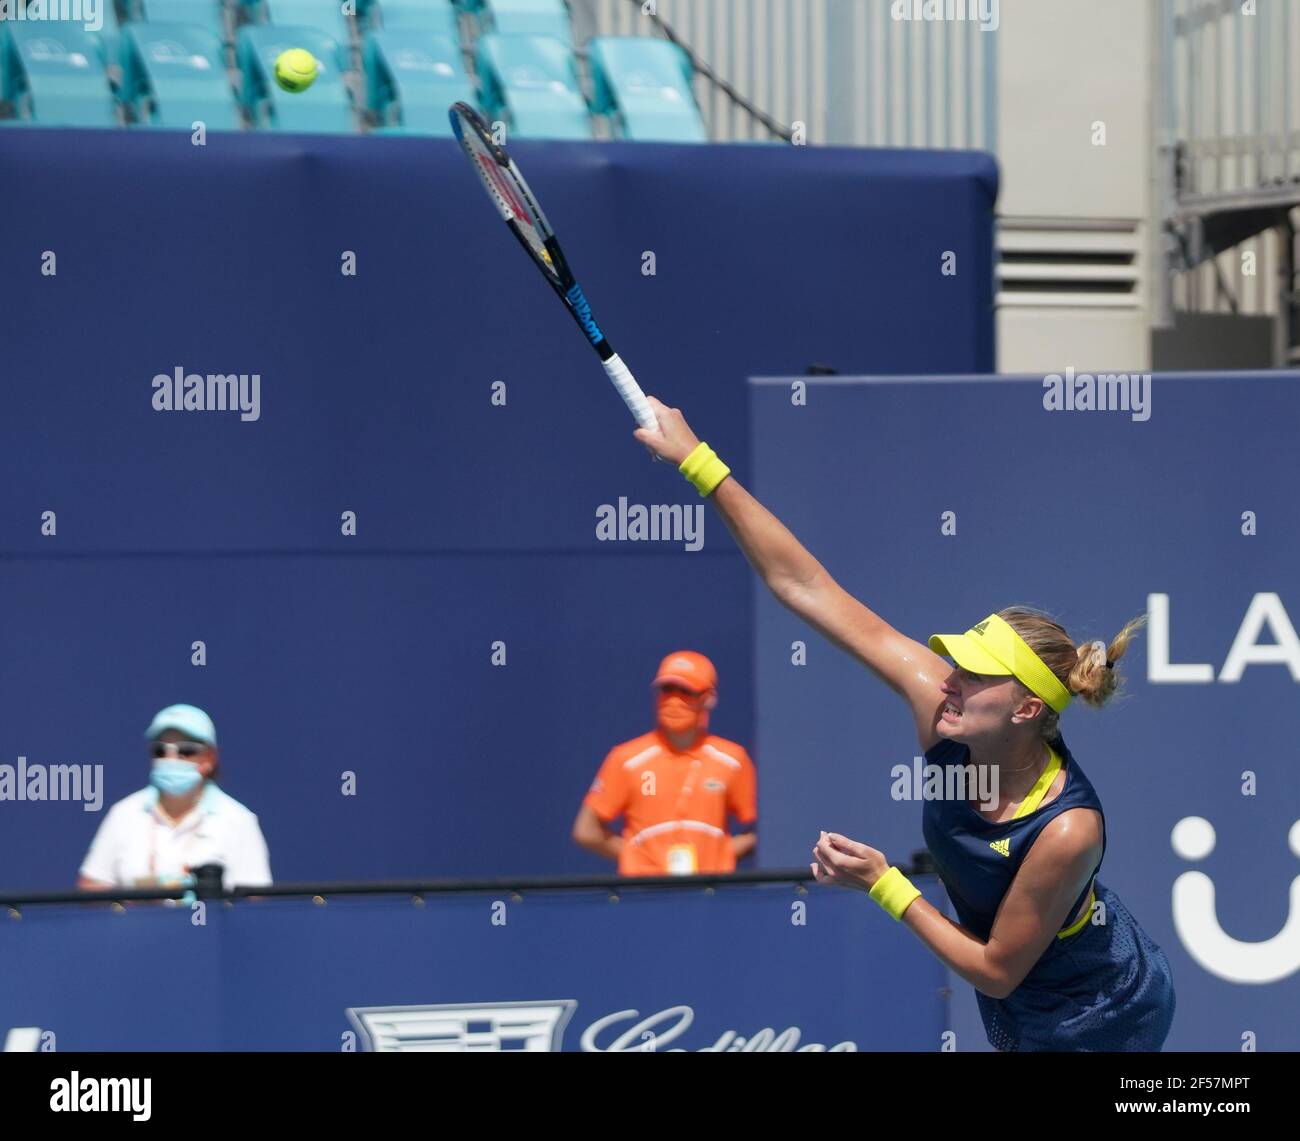 MIAMI GARDENS, FLORIDA - MARCH 24: Kristina Mladenovic of France serves during her women's singles first round match against Danielle Collins of United States on day three of the 2021 Miami Open presented by Itaú at Hard Rock Stadium on March 24, 2021 in Miami Gardens, Florida.  (Photo by Alberto E. Tamargo/Sipa USA) Stock Photo